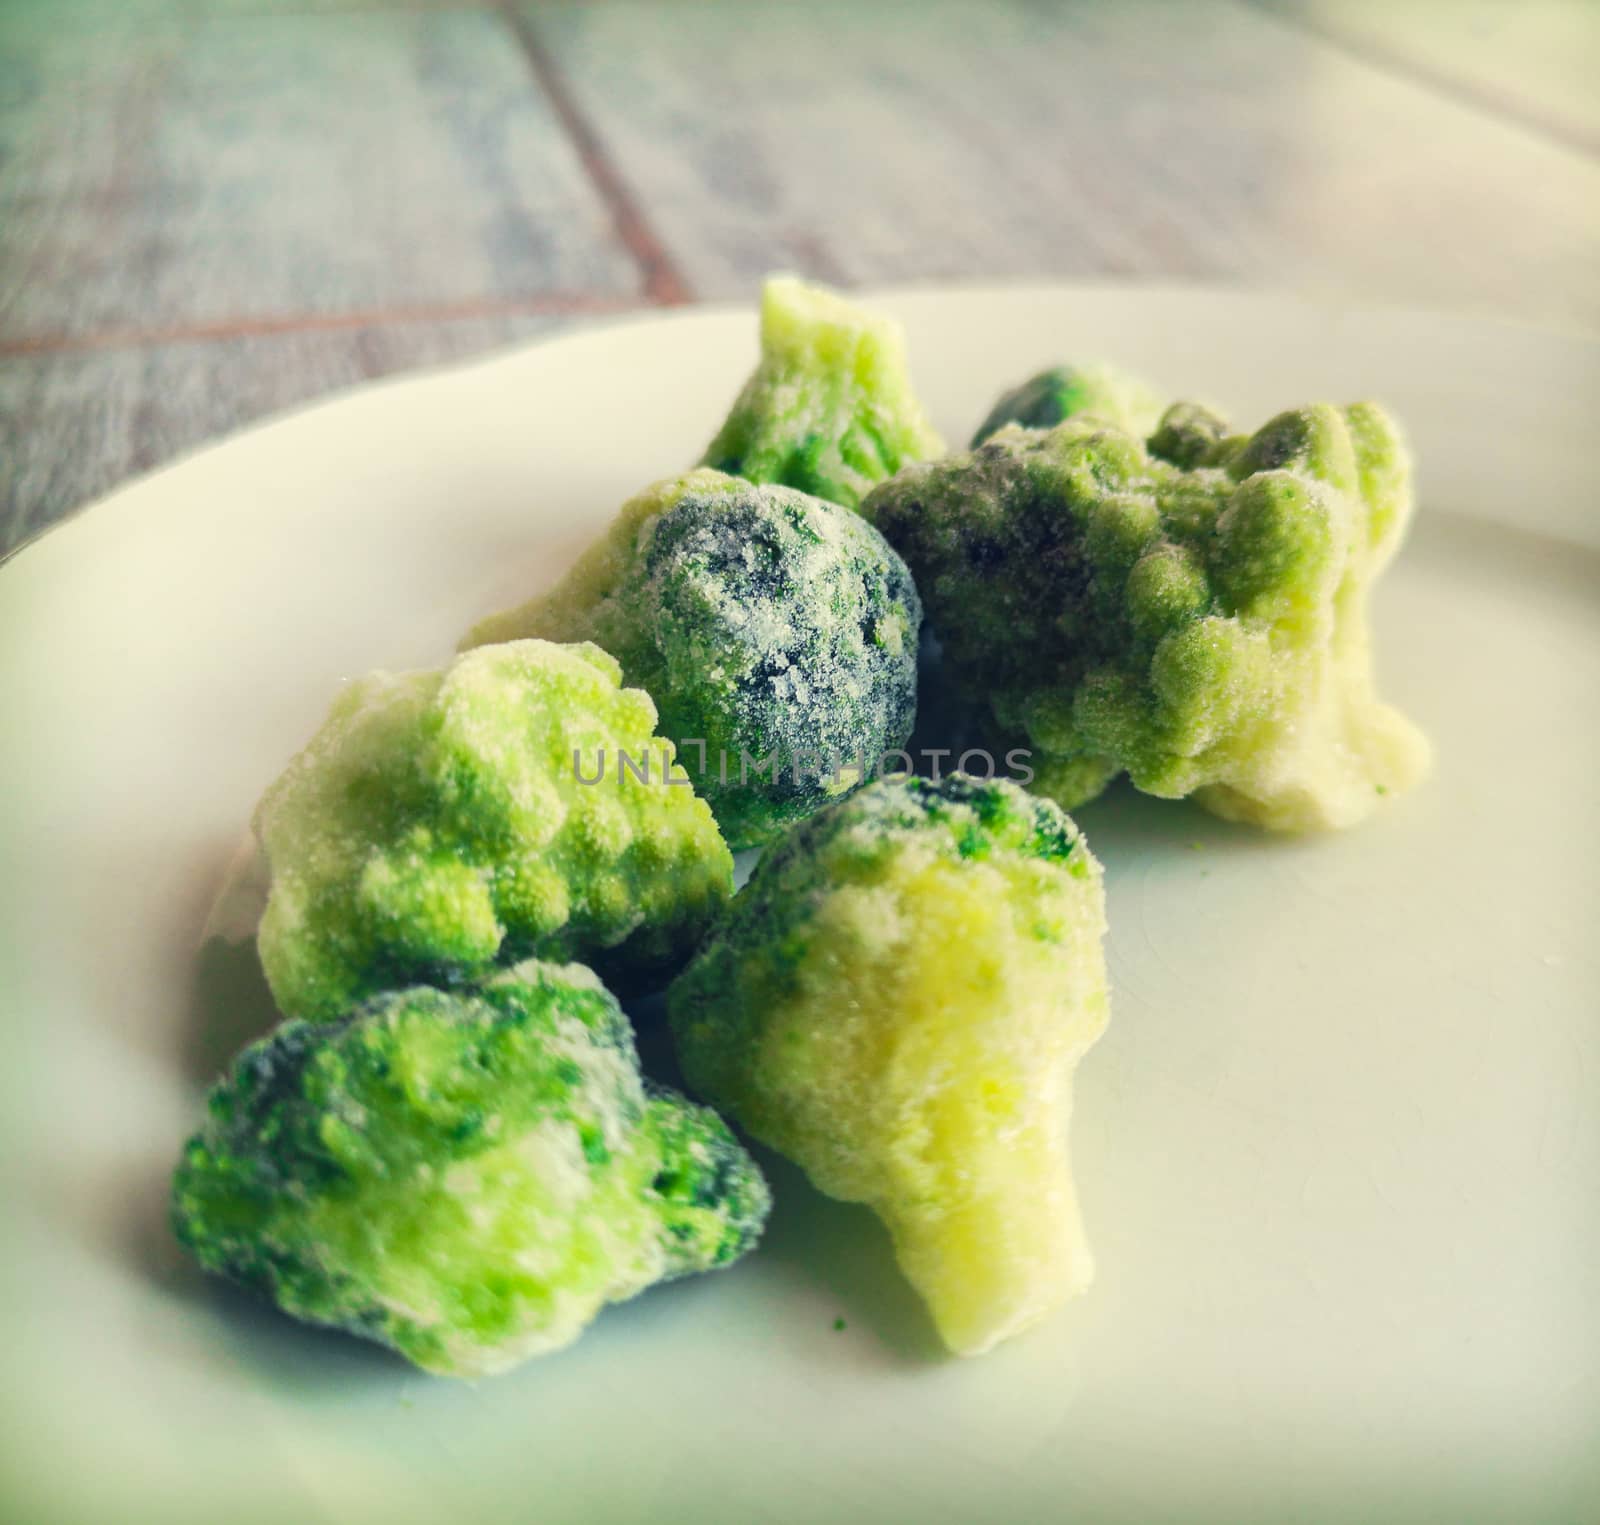 frosted broccoli frozen veggies icing in freezer fridge by LucaLorenzelli